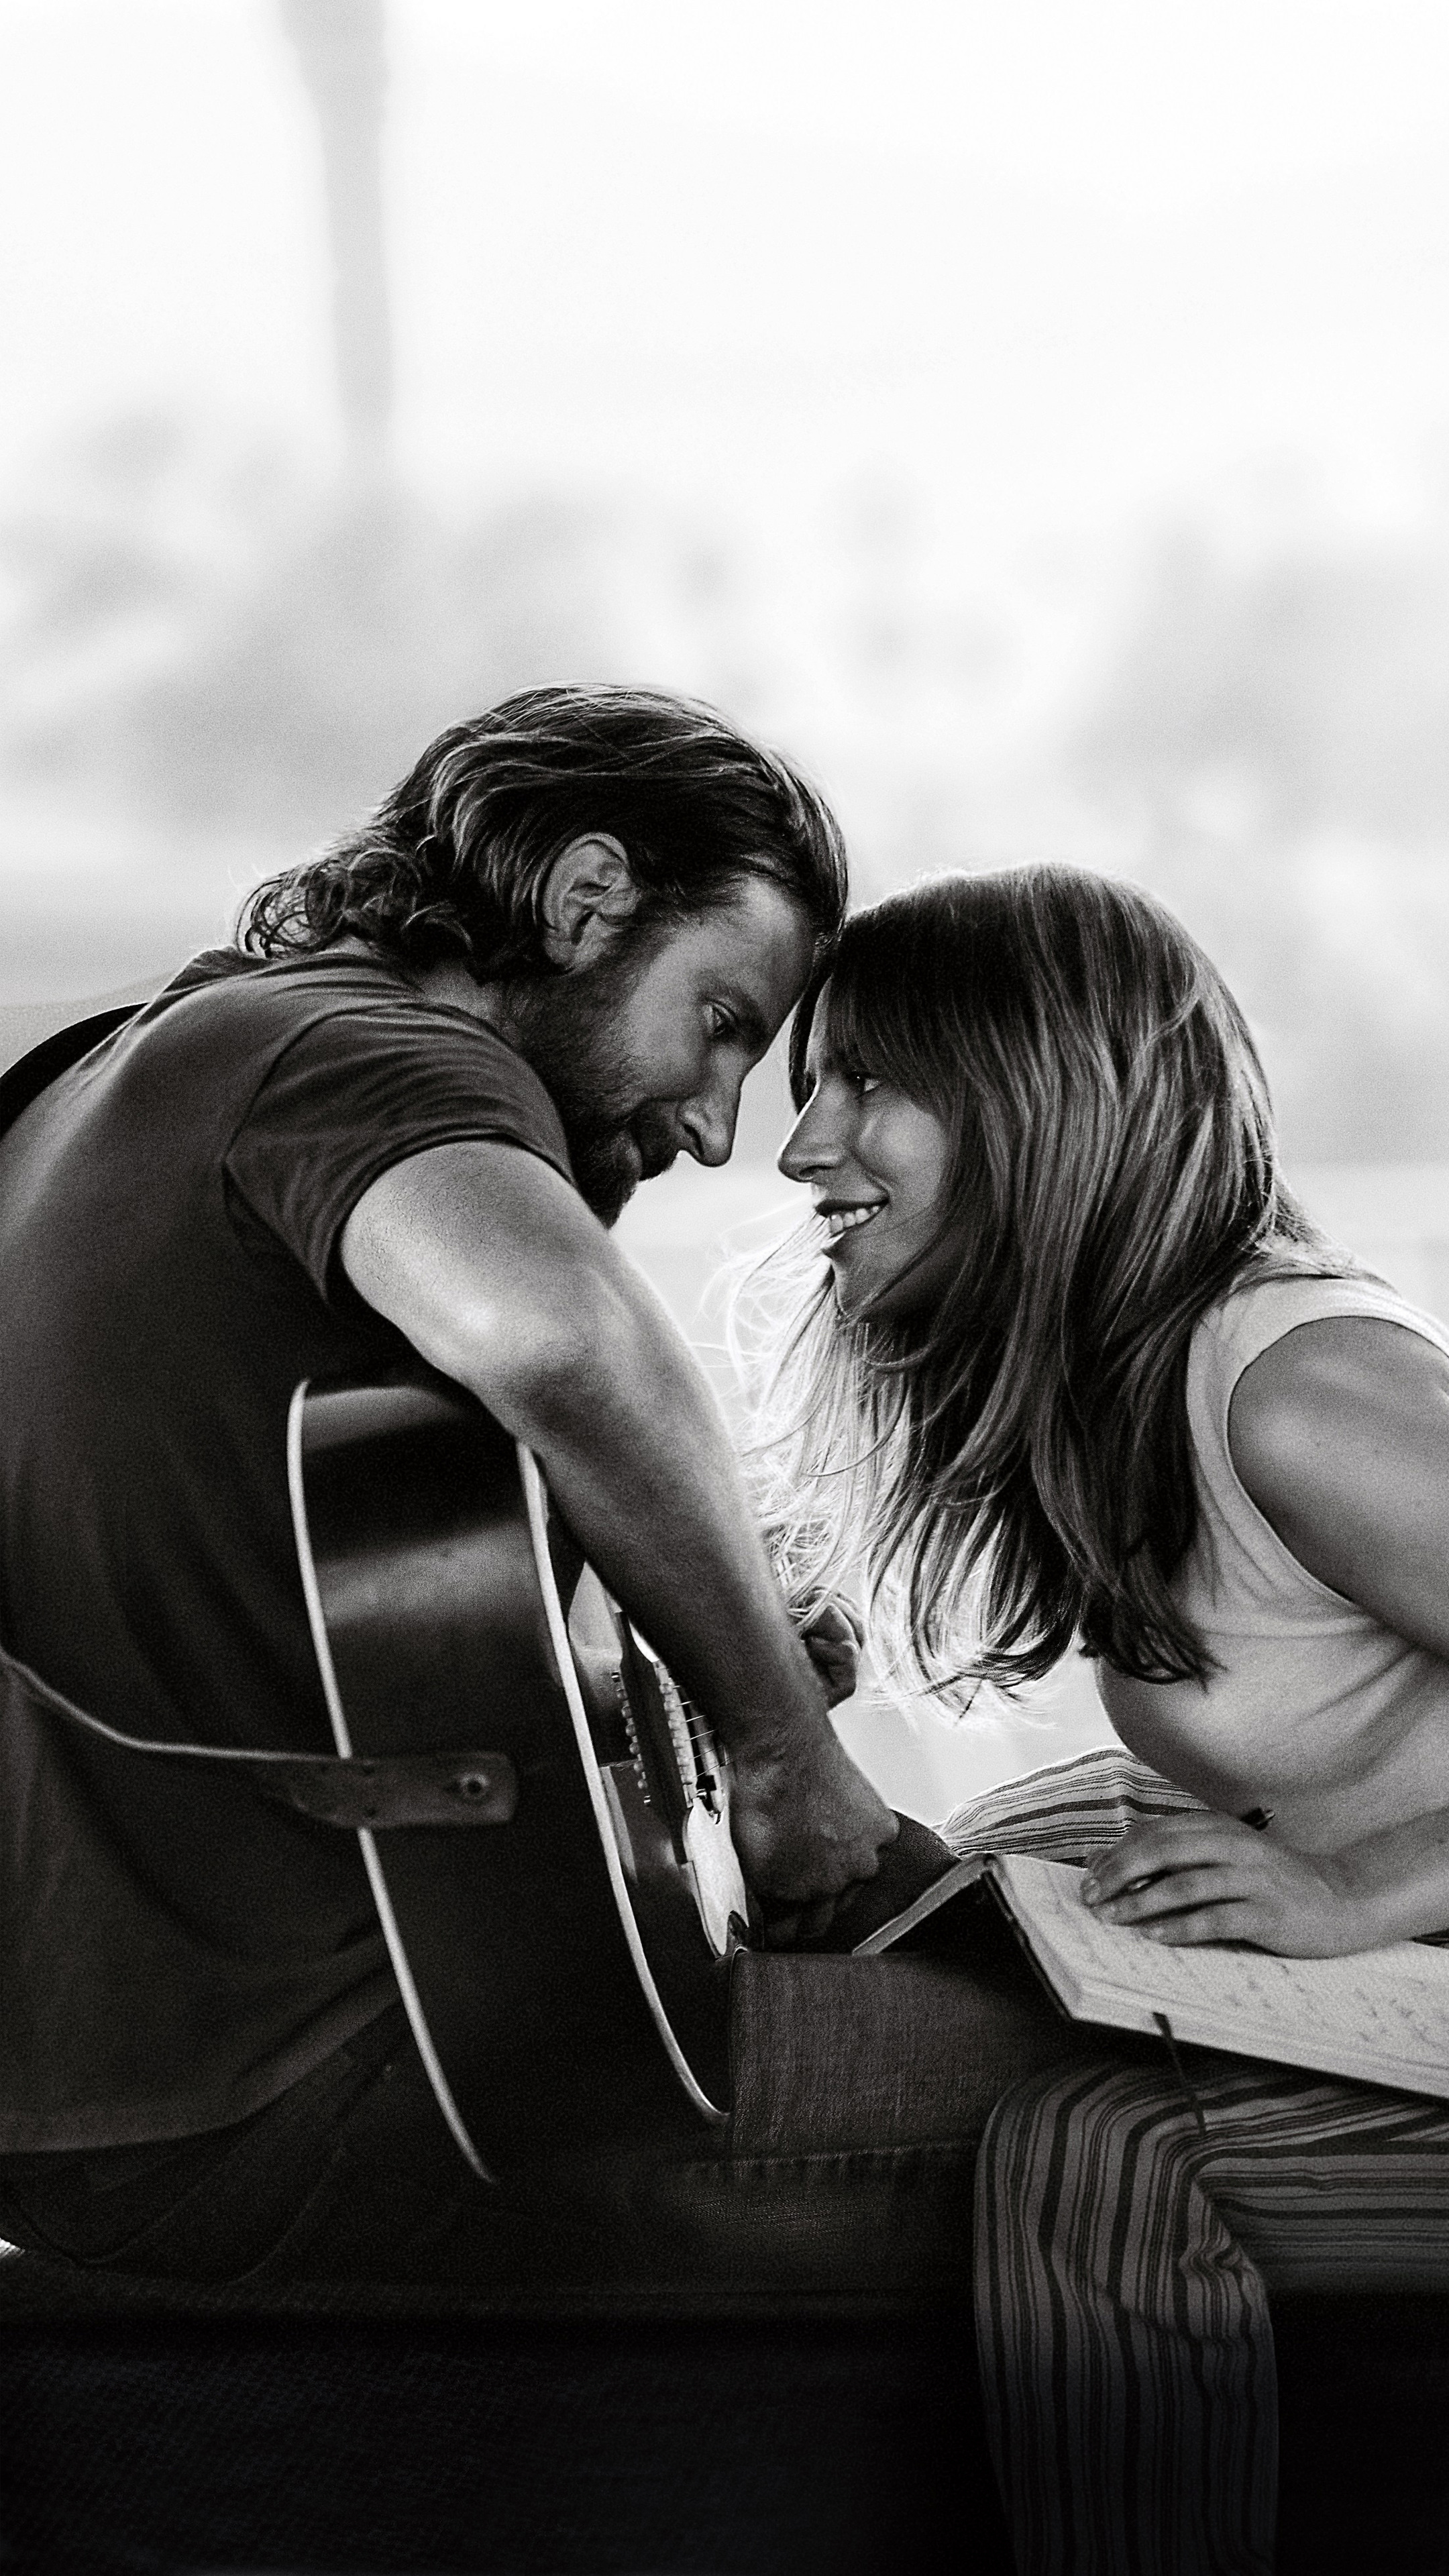 A Star Is Born: A 2018 American romantic drama film produced and directed by Bradley Cooper. 2160x3840 4K Background.